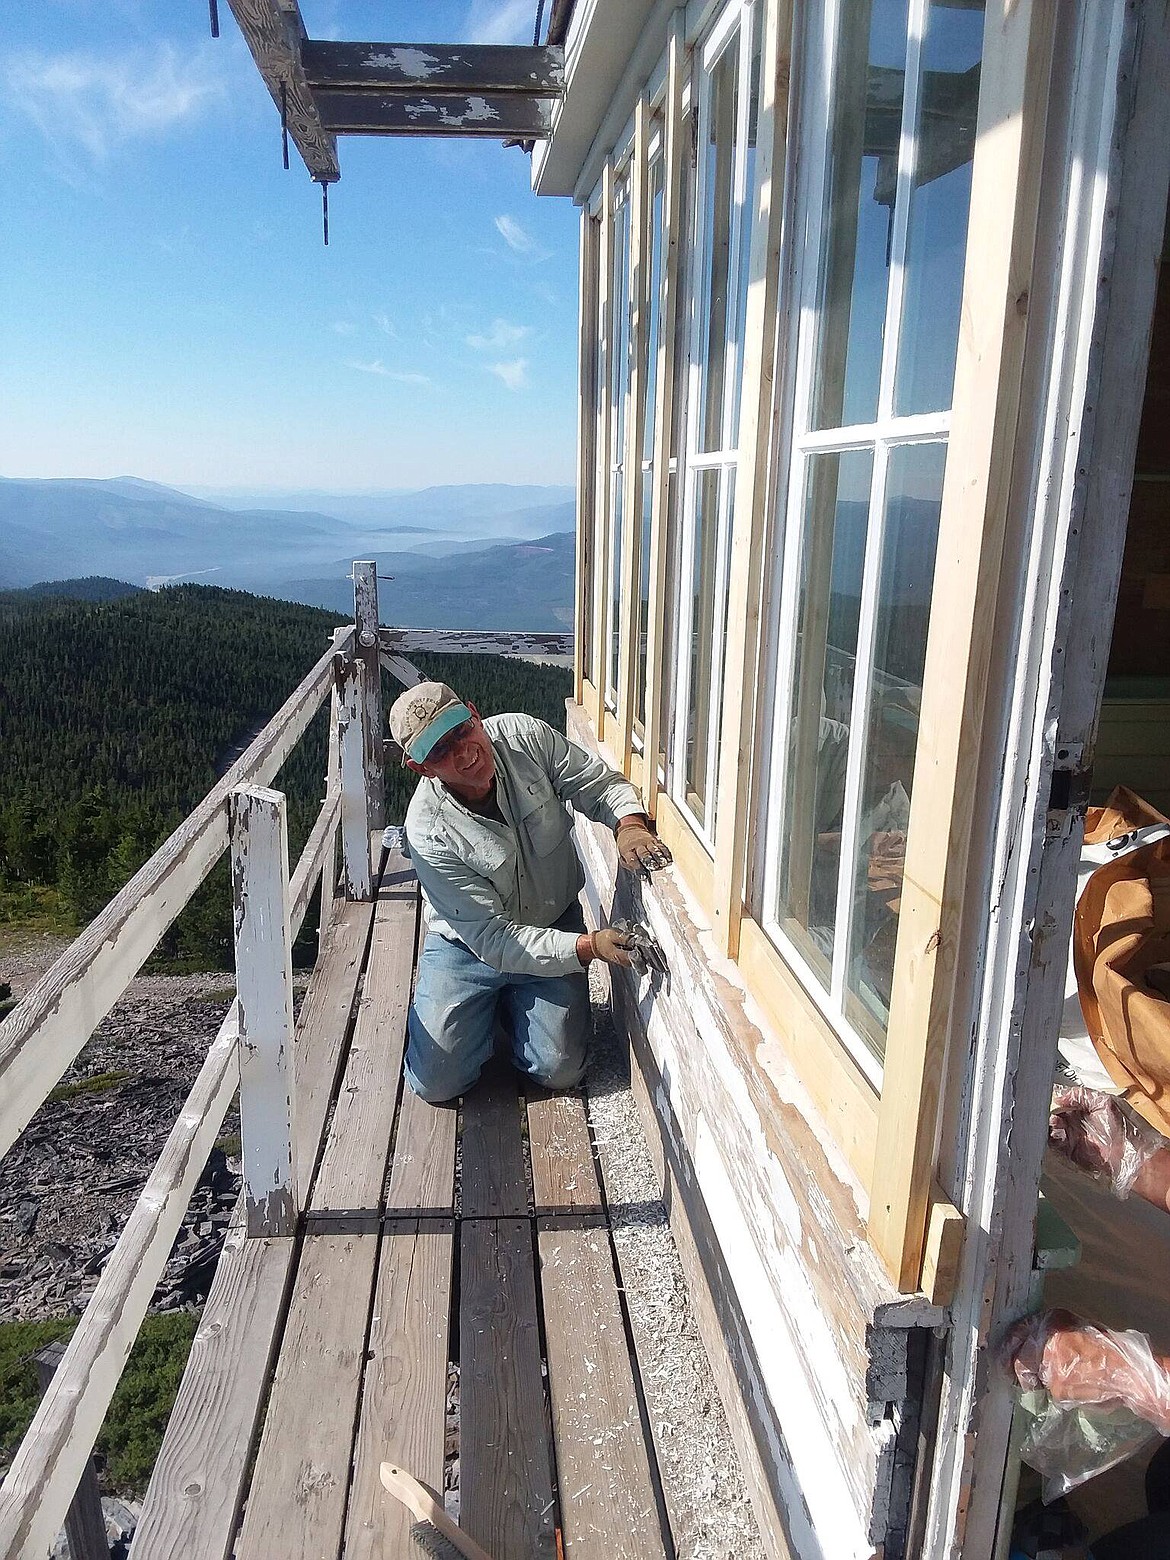 The Northwest Montana Chapter of the Forest Fire Lookout Association has done a number of projects this summer, including repainting the exterior of the Mount Brown Lookout in Glacier National Park. (photo provided)